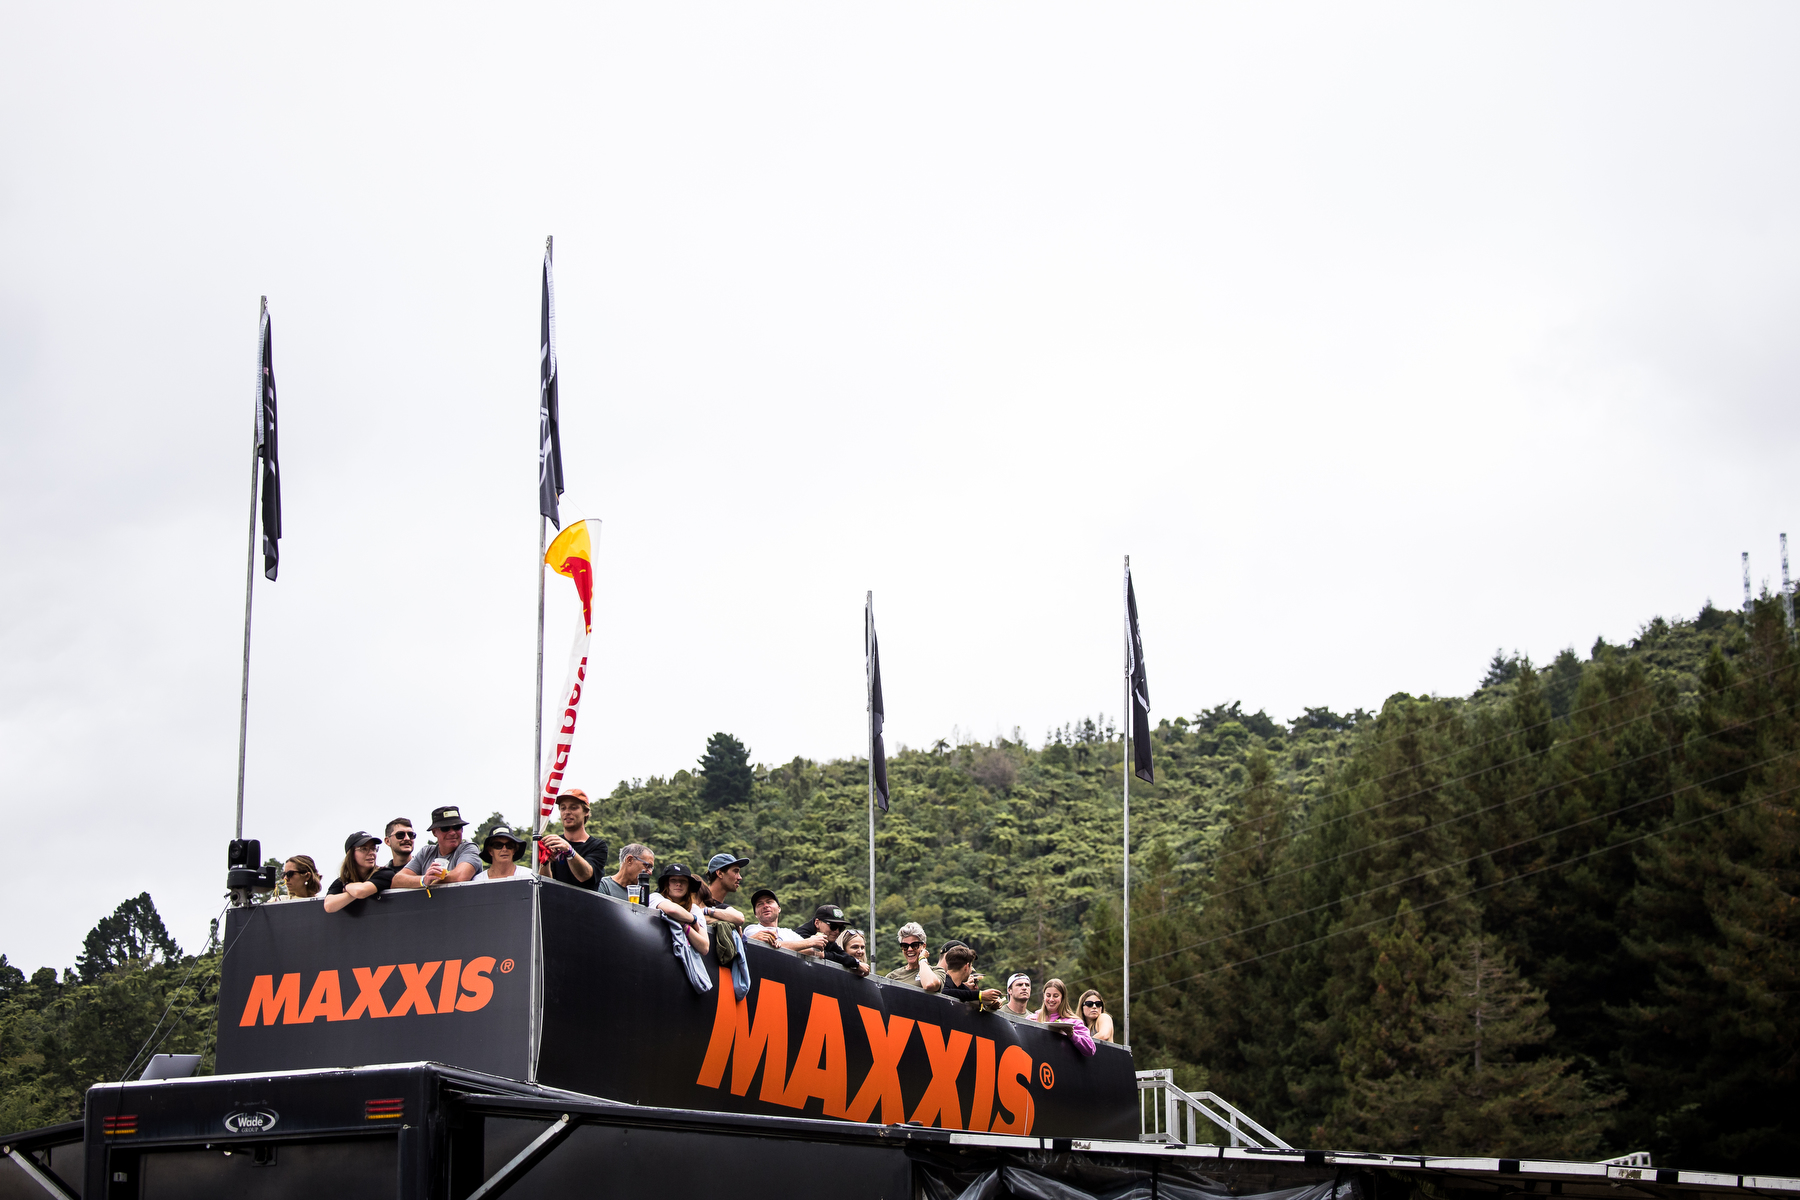 The Maxxis viewing booth